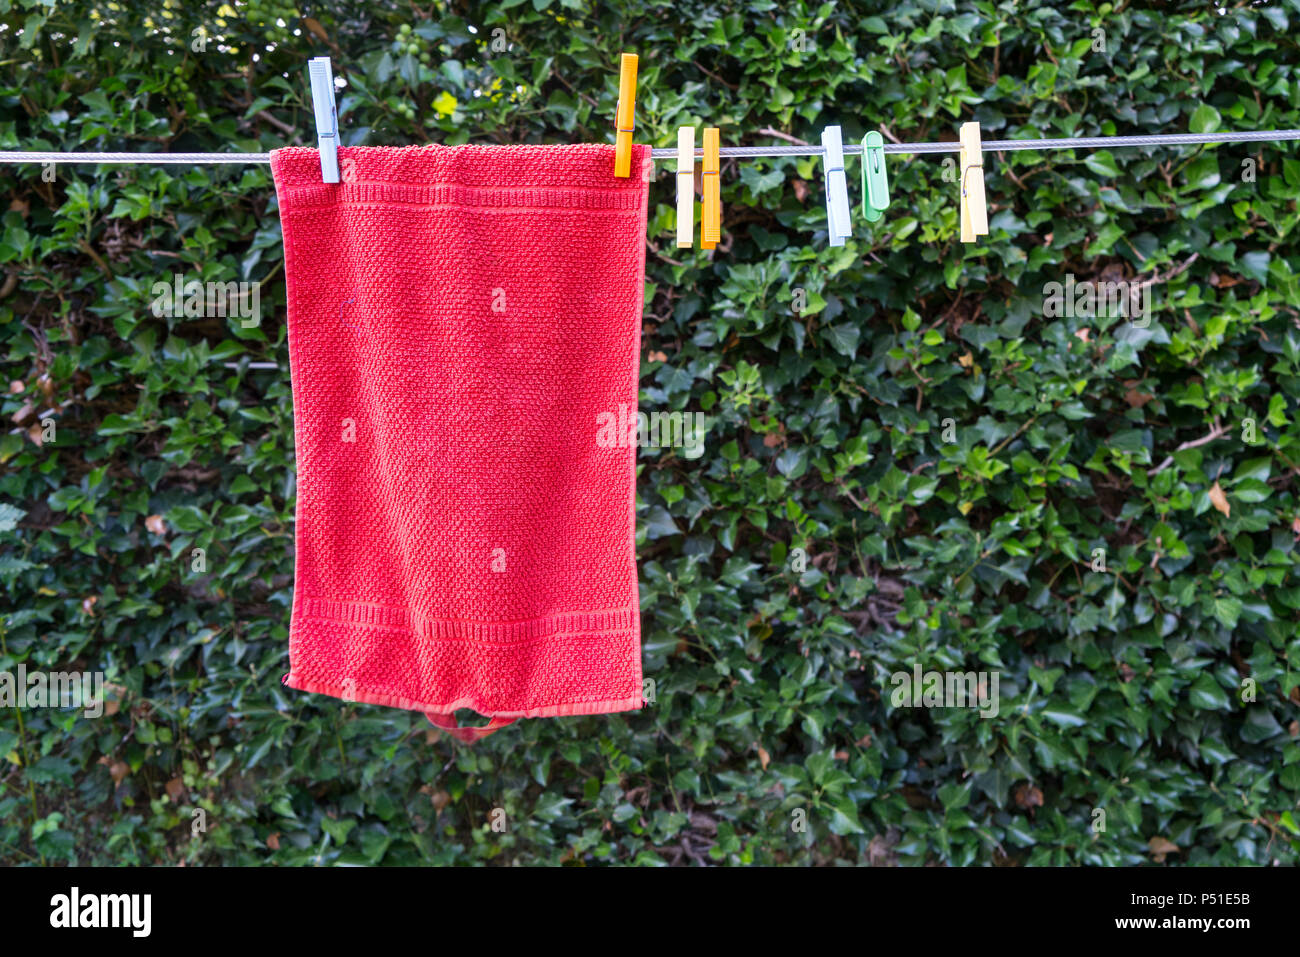 a red towel hanging to dry outdoors in the garden Stock Photo